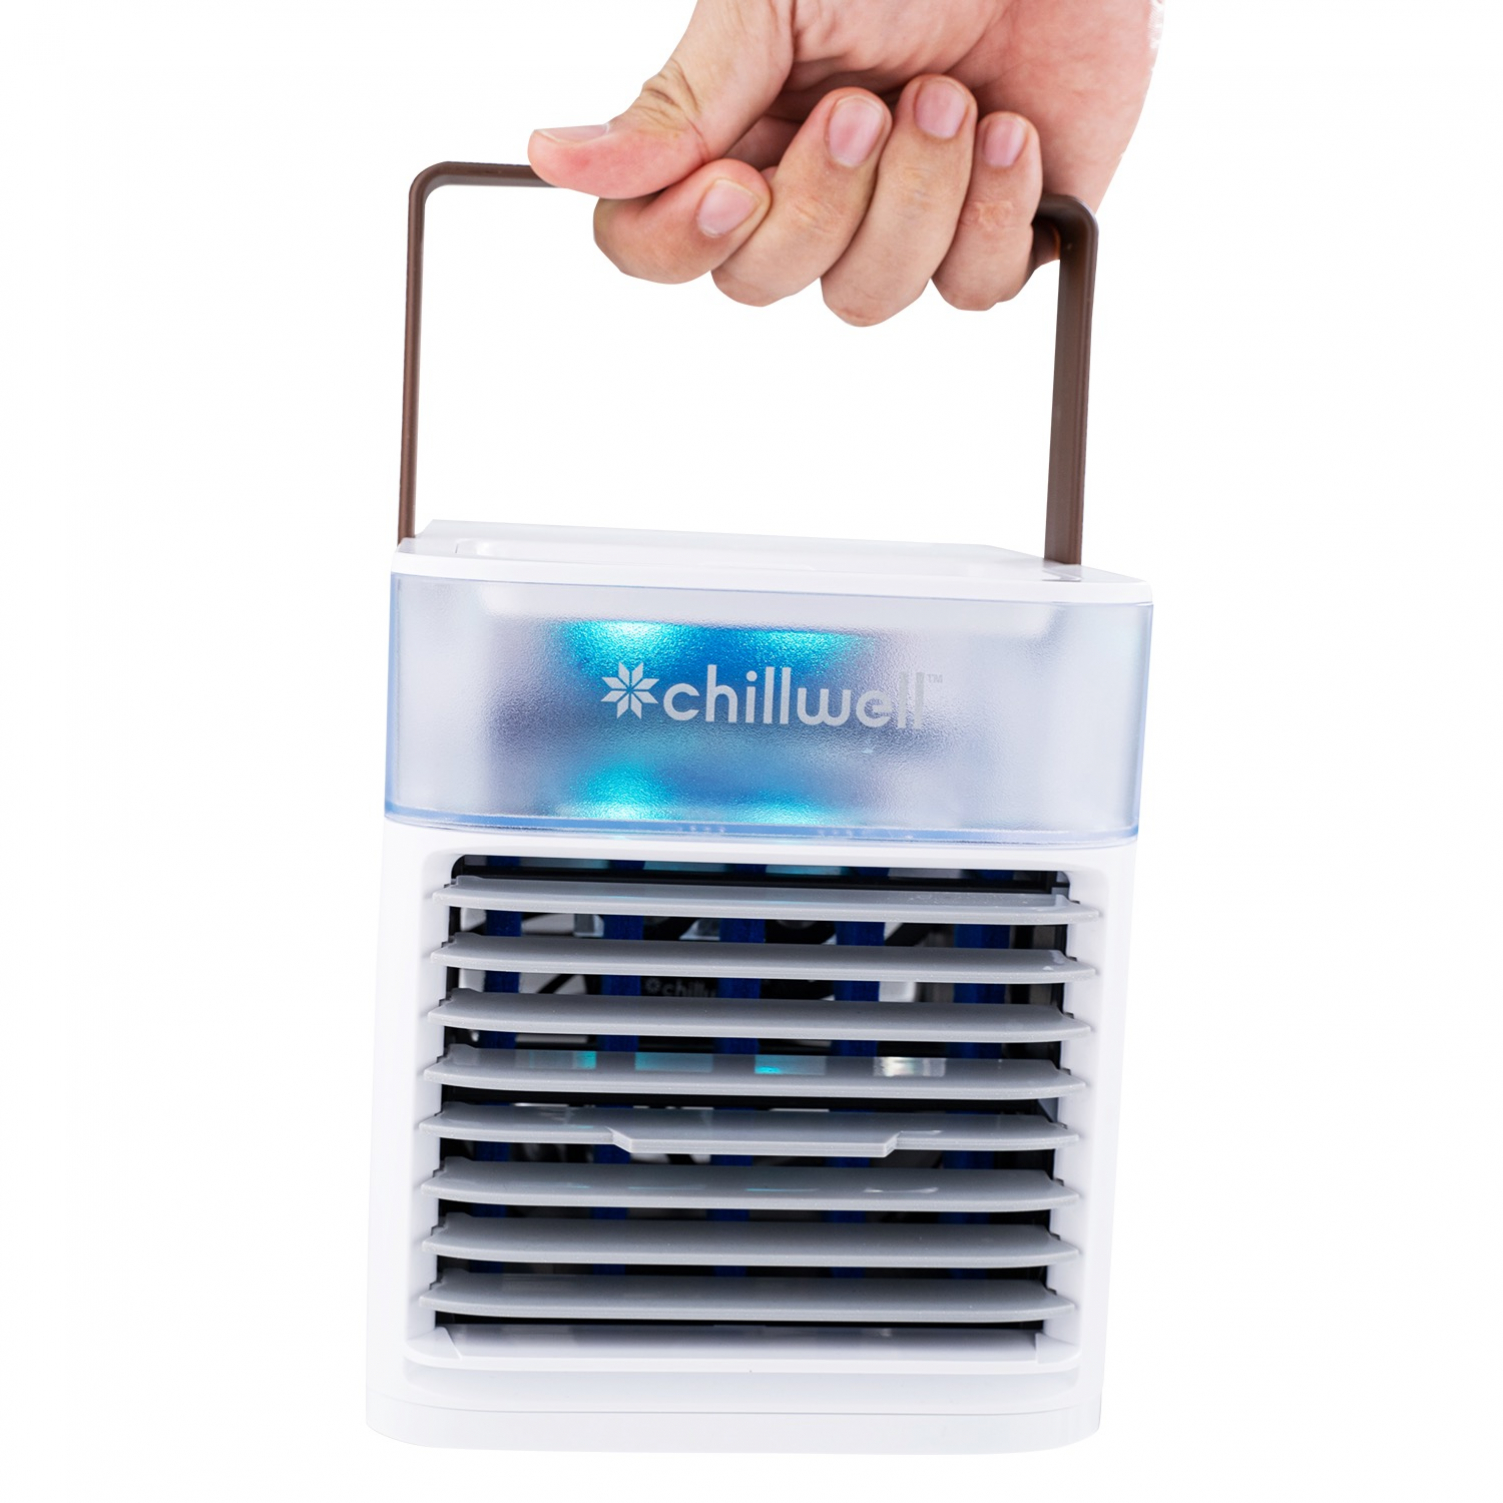 Customer Reviews Of Chillwell AC